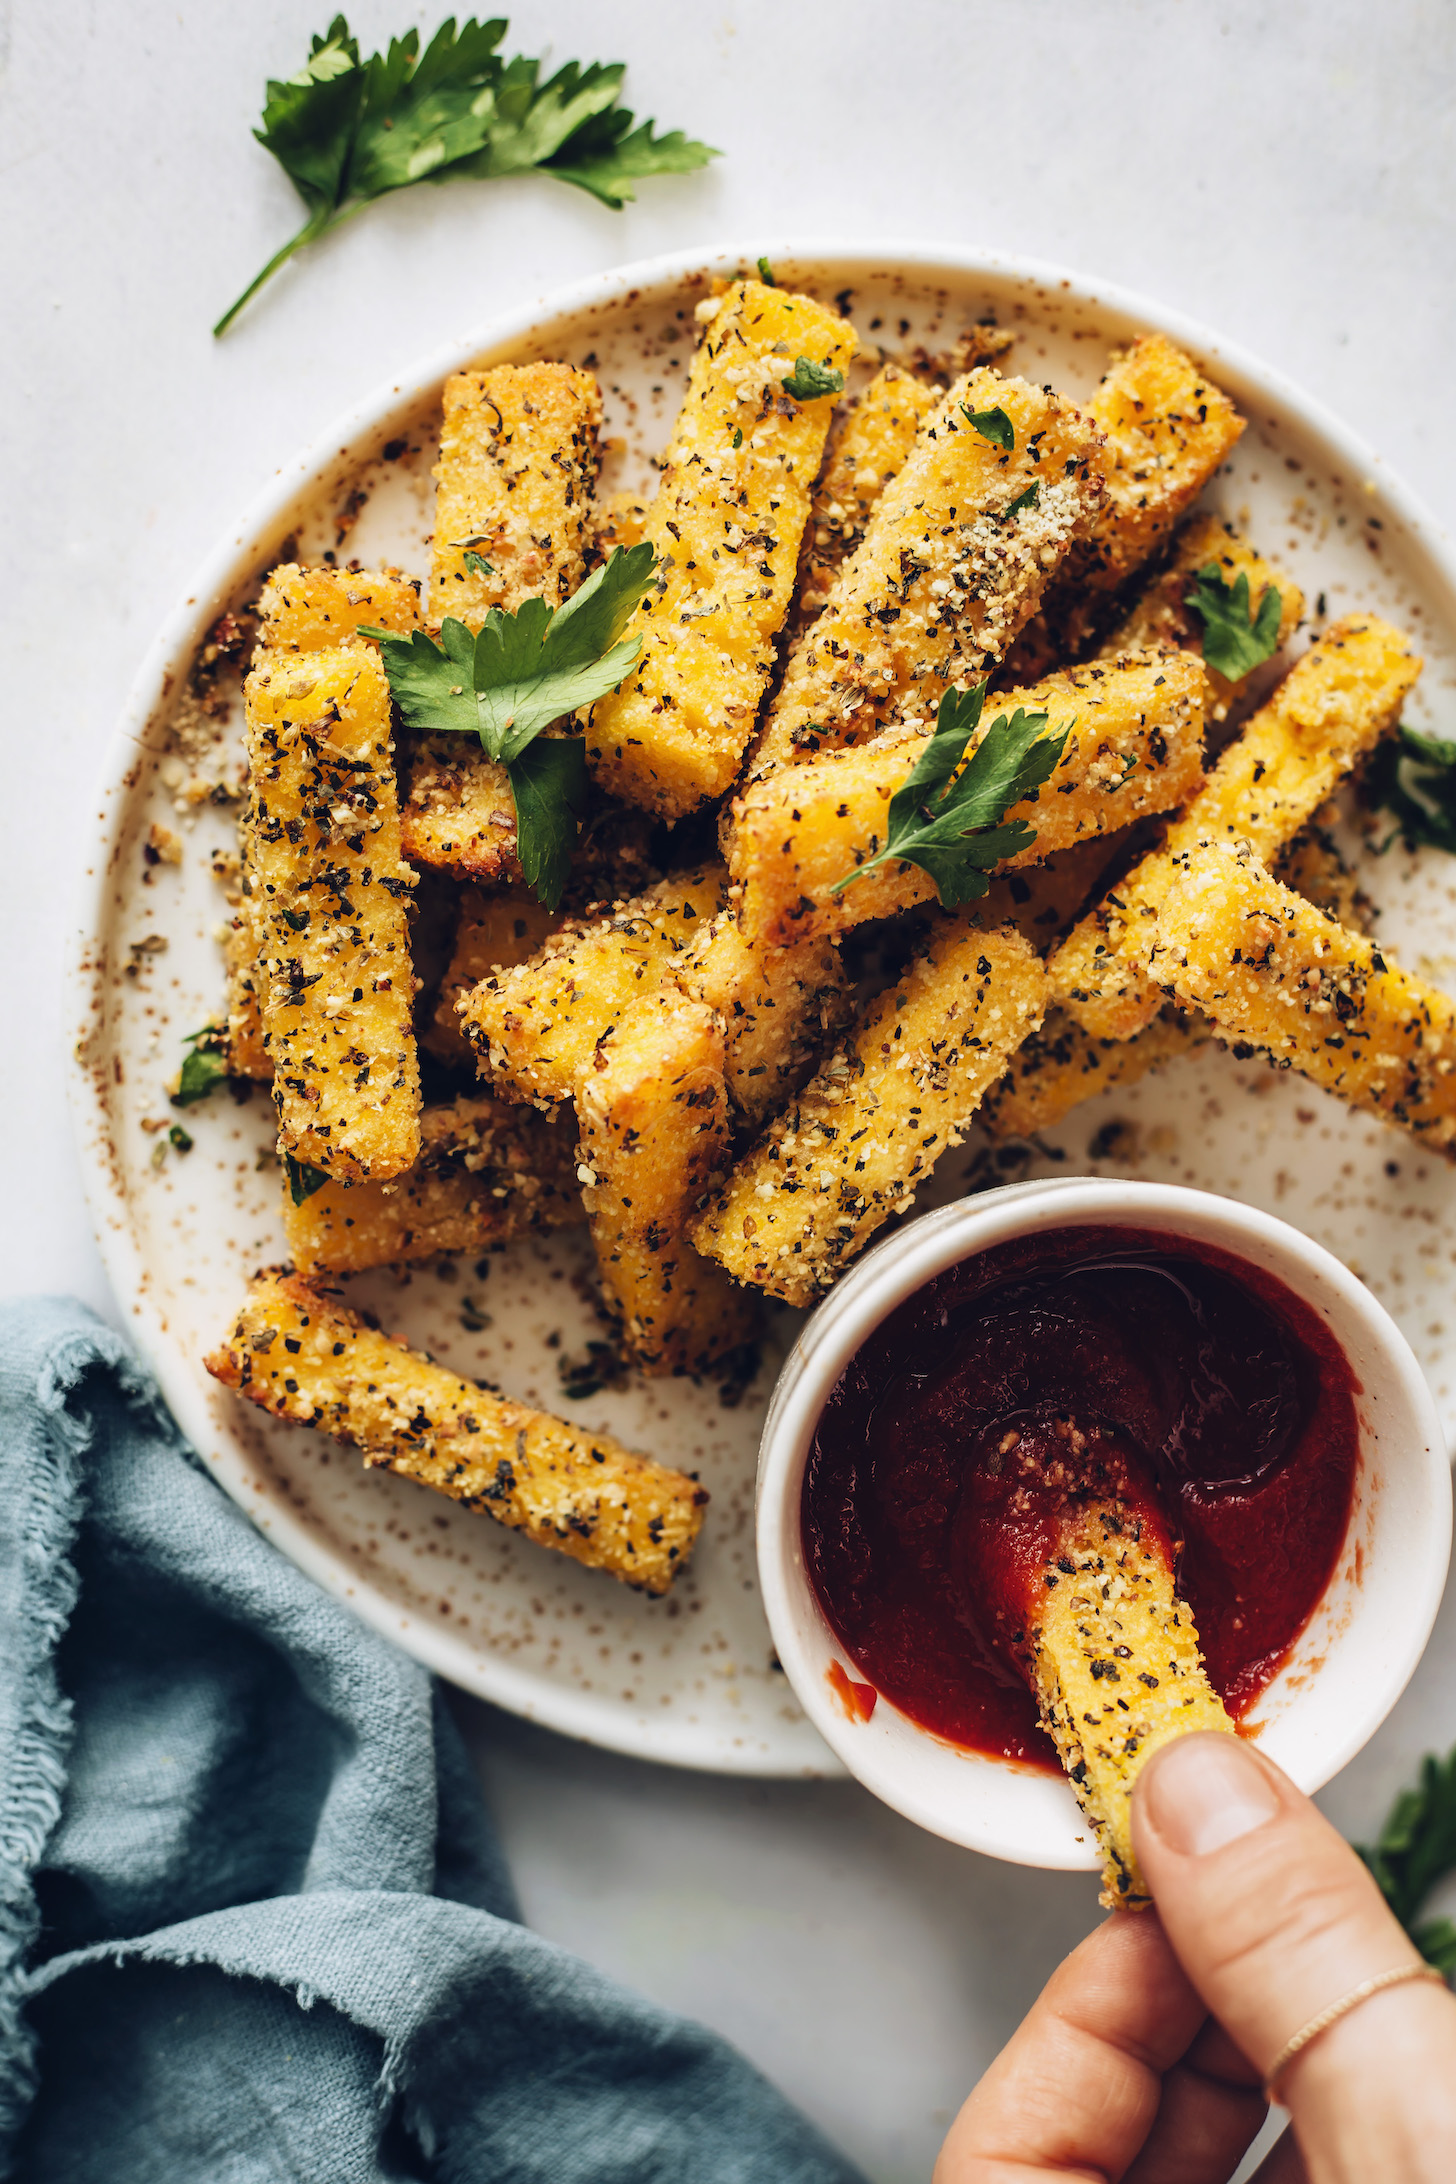 Plate of polenta fries with one being dipped in a bowl of marinara